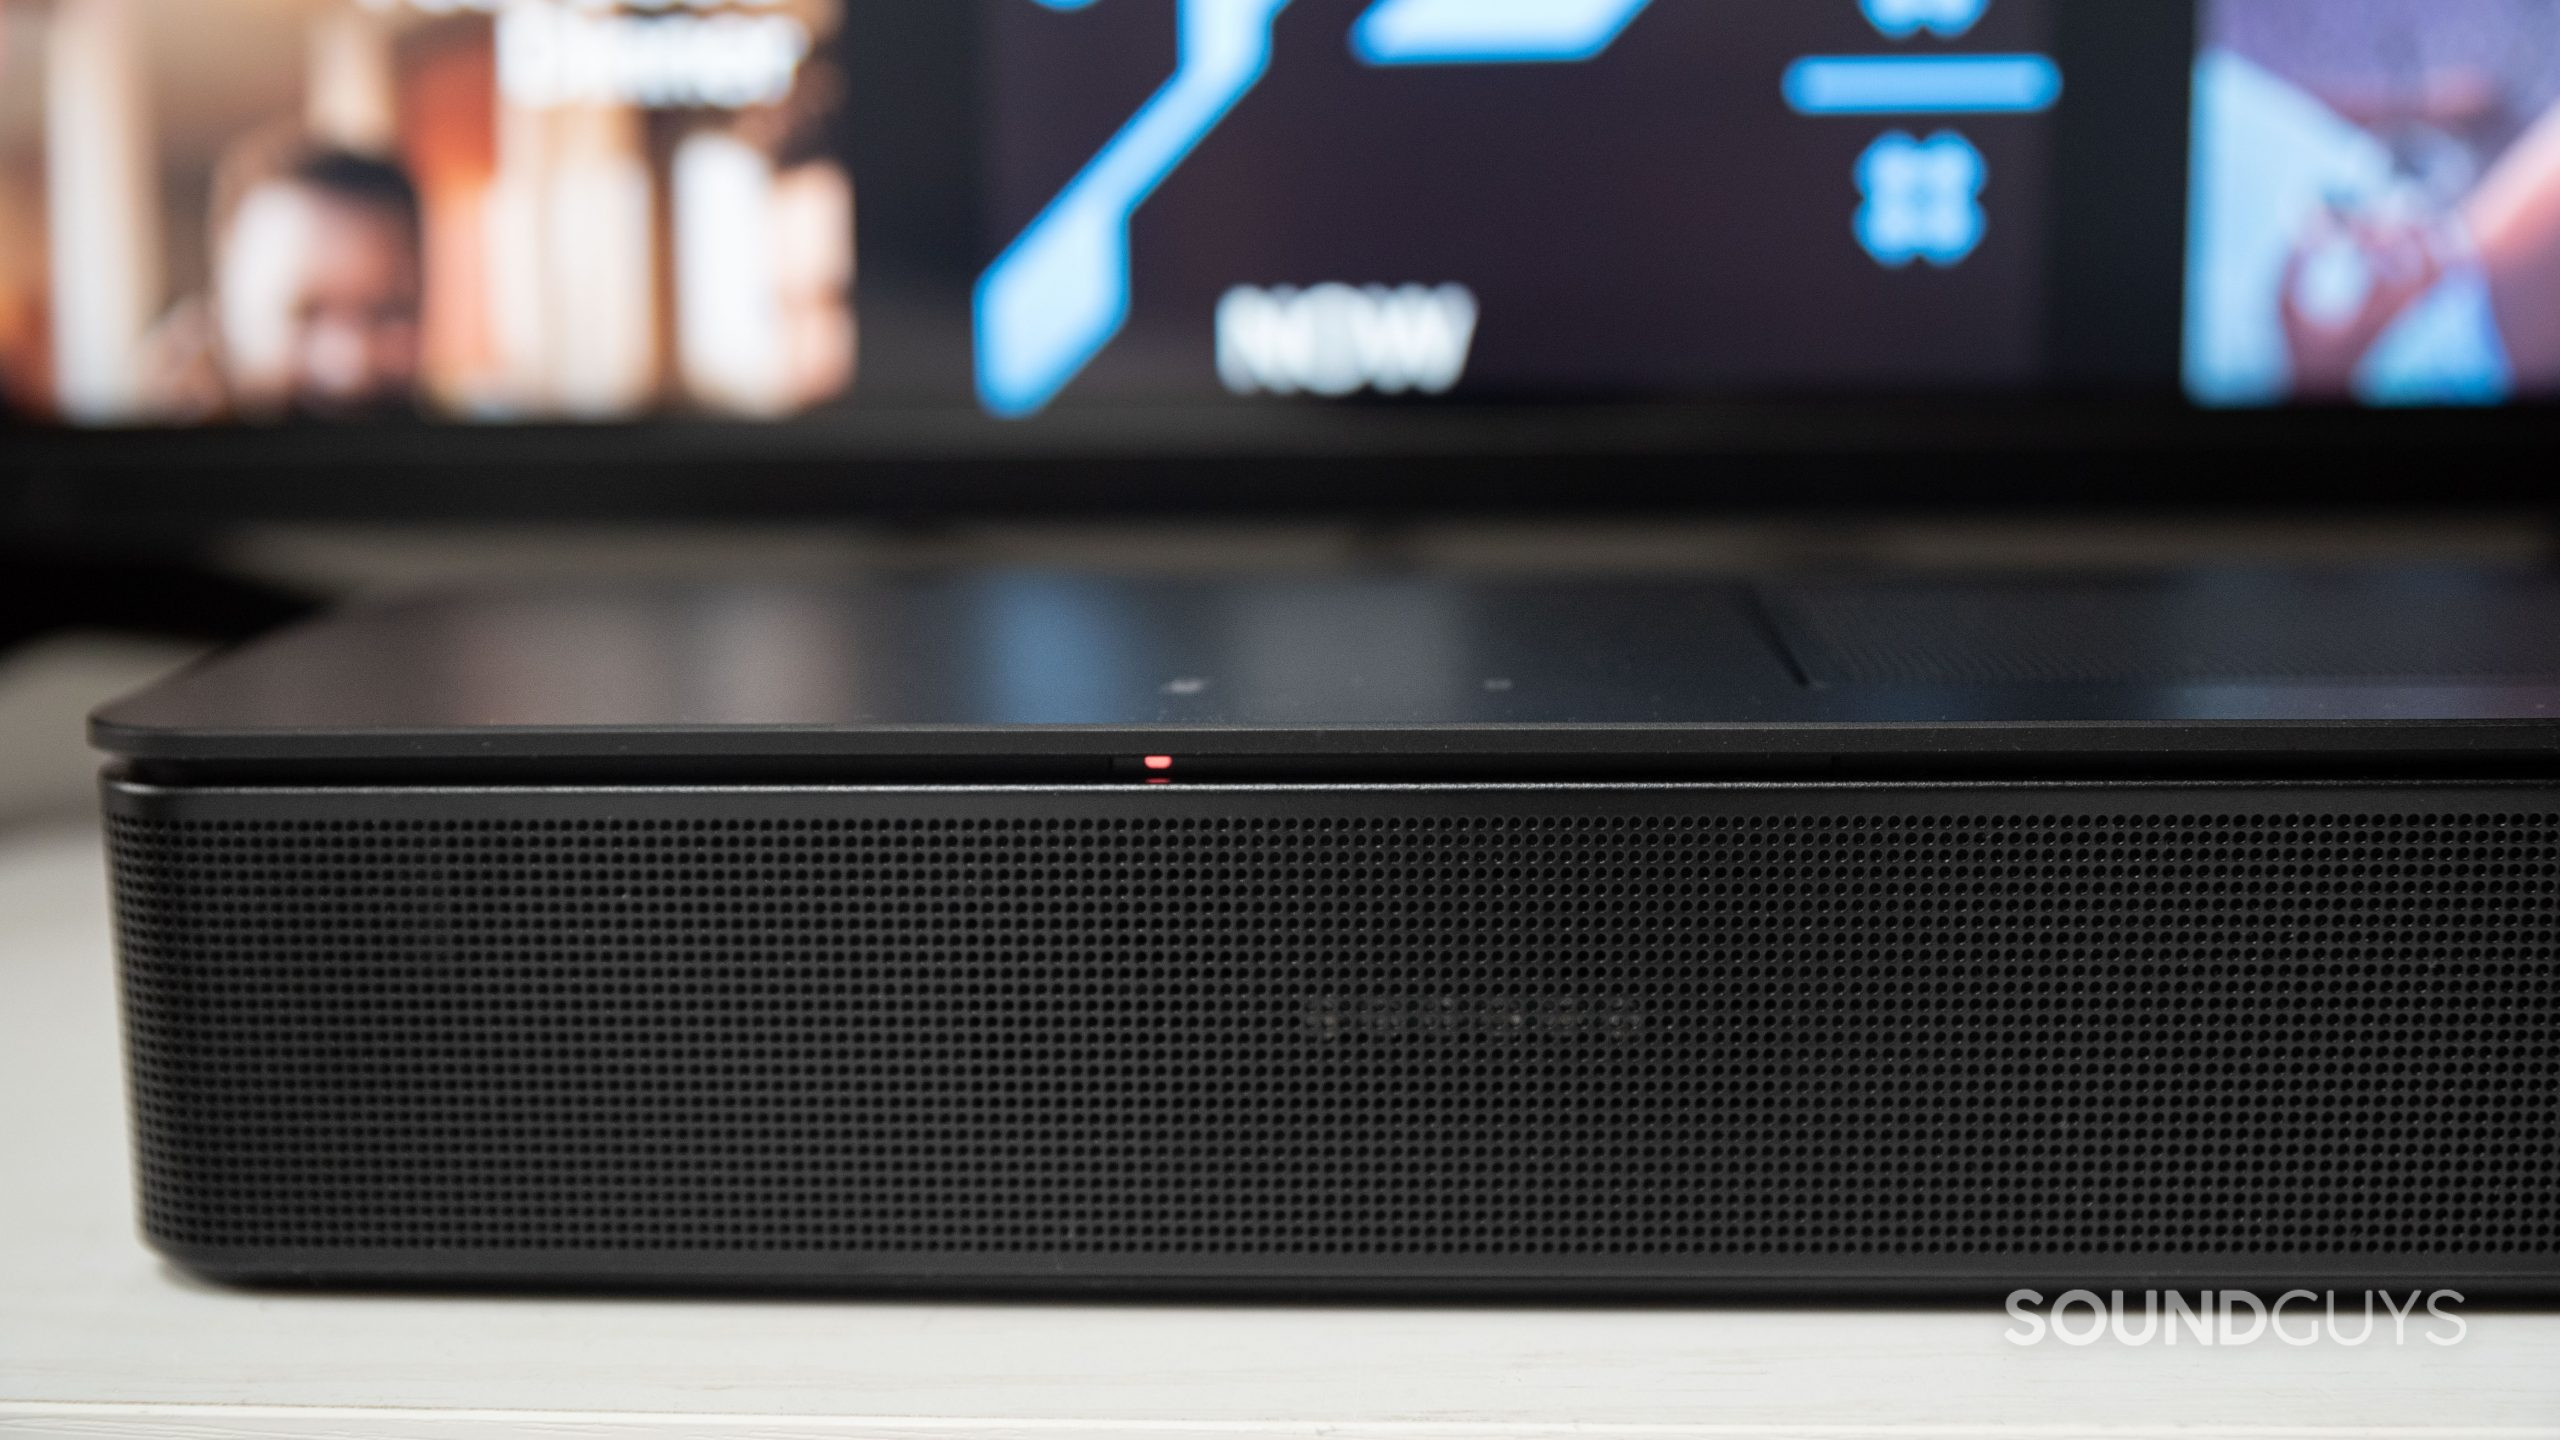 The red LED indicates the mic is off on the Bose Smart Soundbar 600.